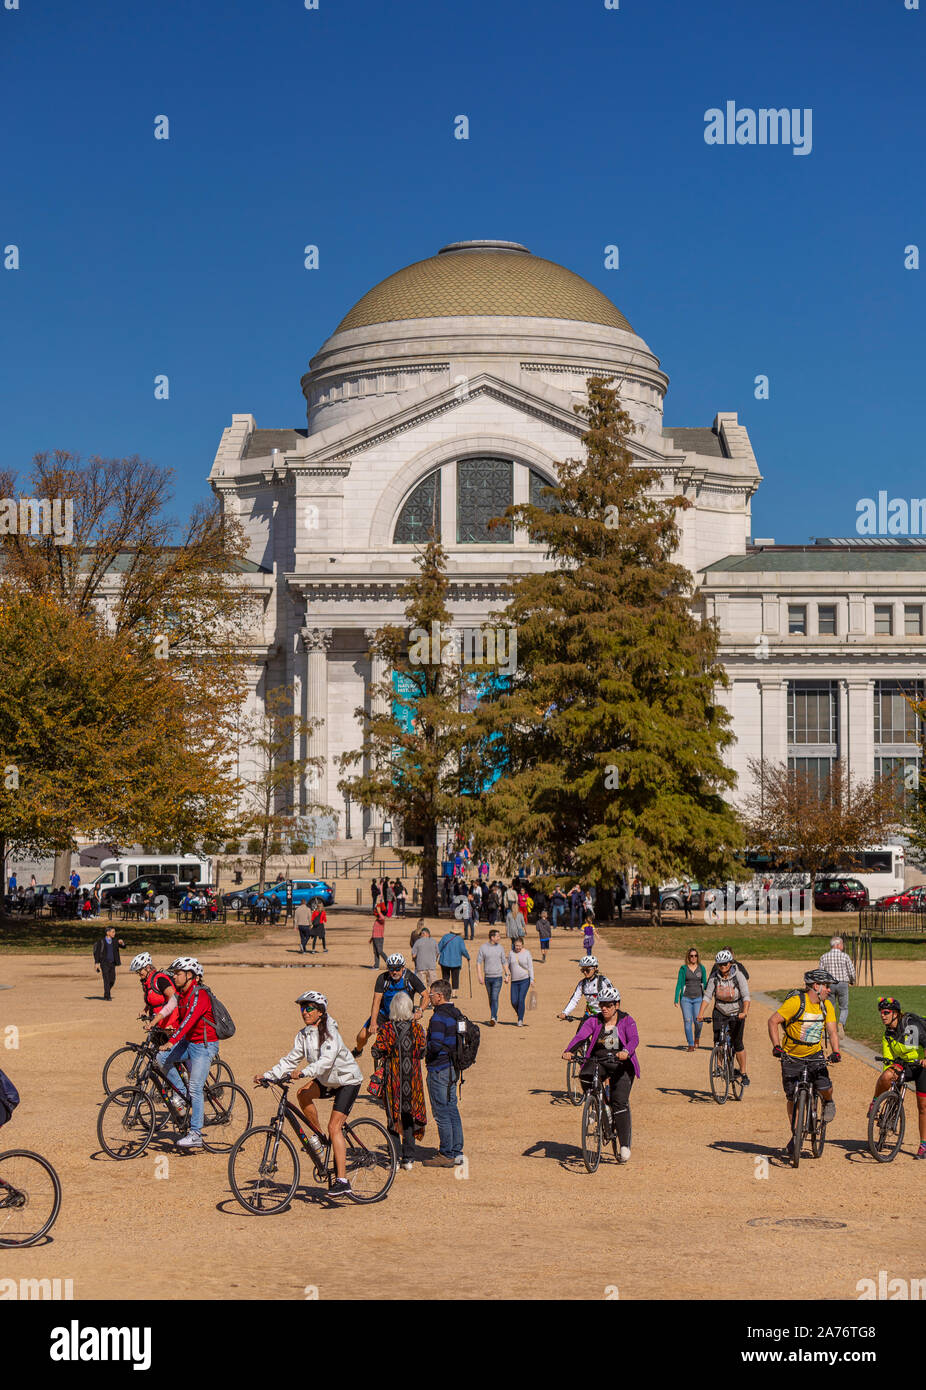 WASHINGTON, DC, USA - People on bicycle tour in front of Smithsonian National Museum of Natural History. Stock Photo